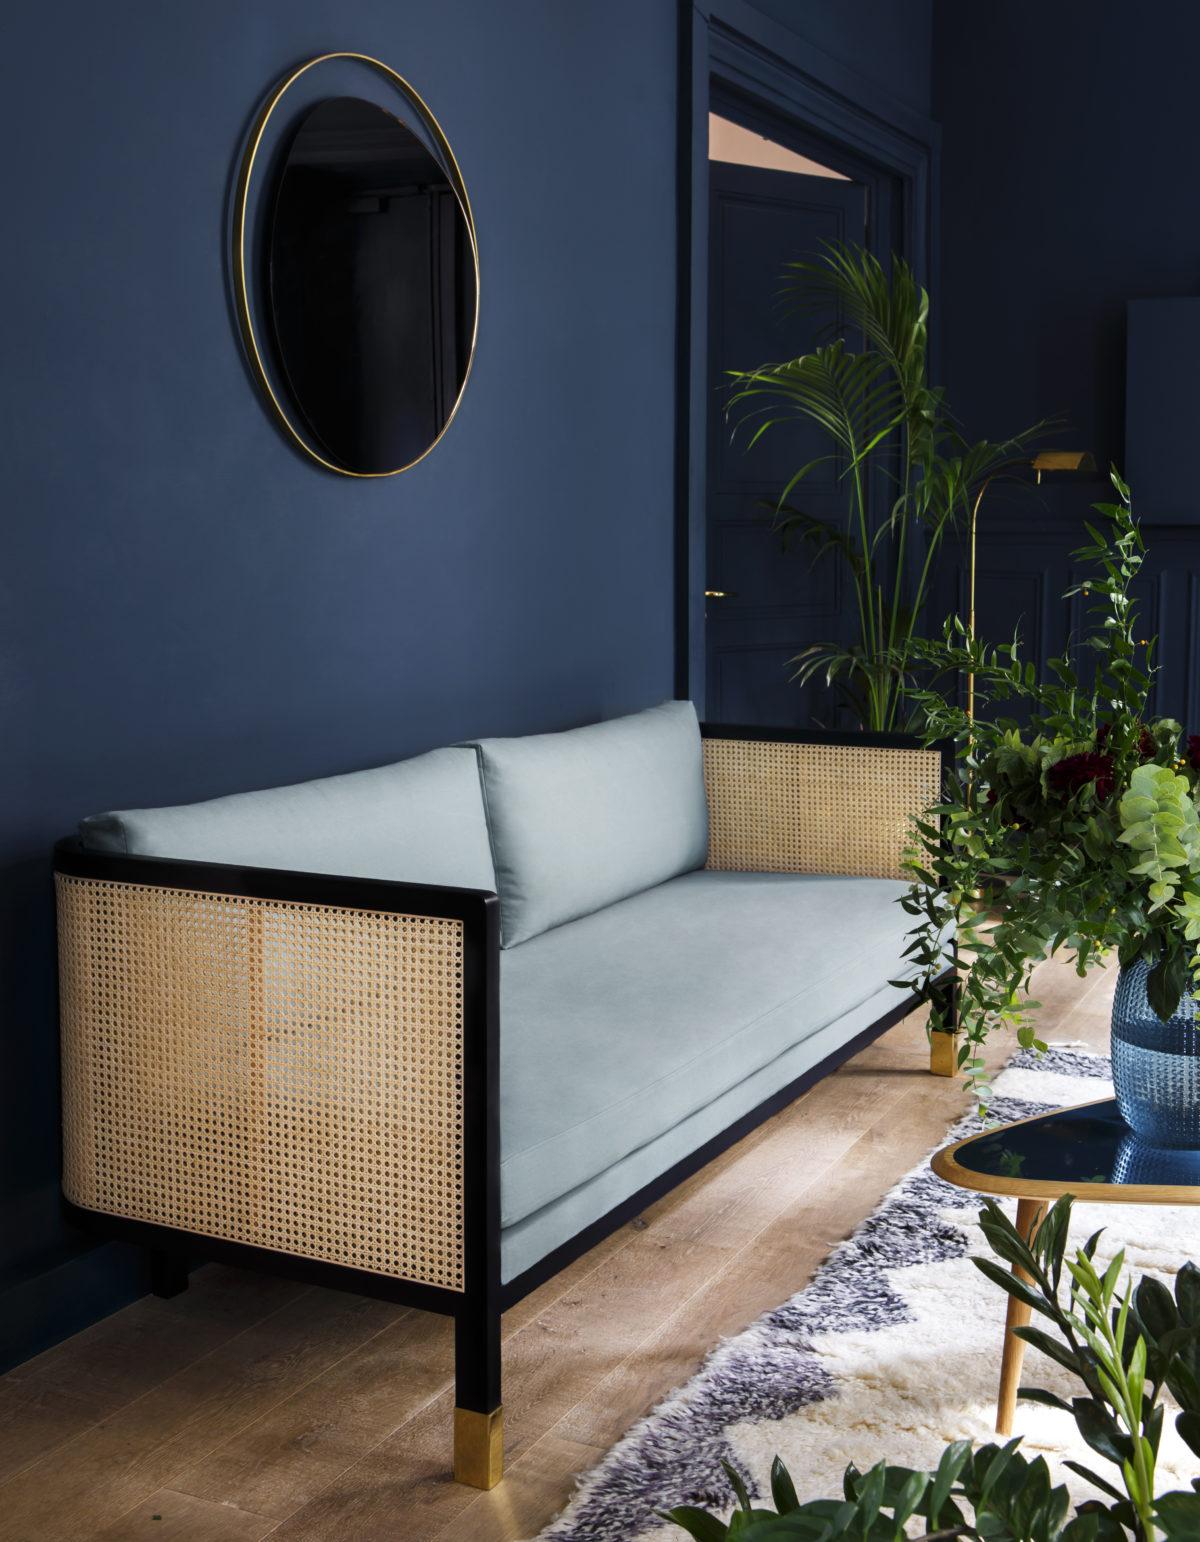 Blue Rattan Sofa Room Decor Inspiration| Blue is a really versatile colour to decorate your home with. But, which colours and tones work well? What kind of accessories work with blue? This post gives you the shades you need to recreate this ombre wall, plus ideas for pulling together an elegant blue colour palette and pieces for your home. Read more: kittyandb.com #blueroom #livingroom #colourfulhomedecor #bluecolorpalette #rattansofa #blueaesthetic #StyleItDark